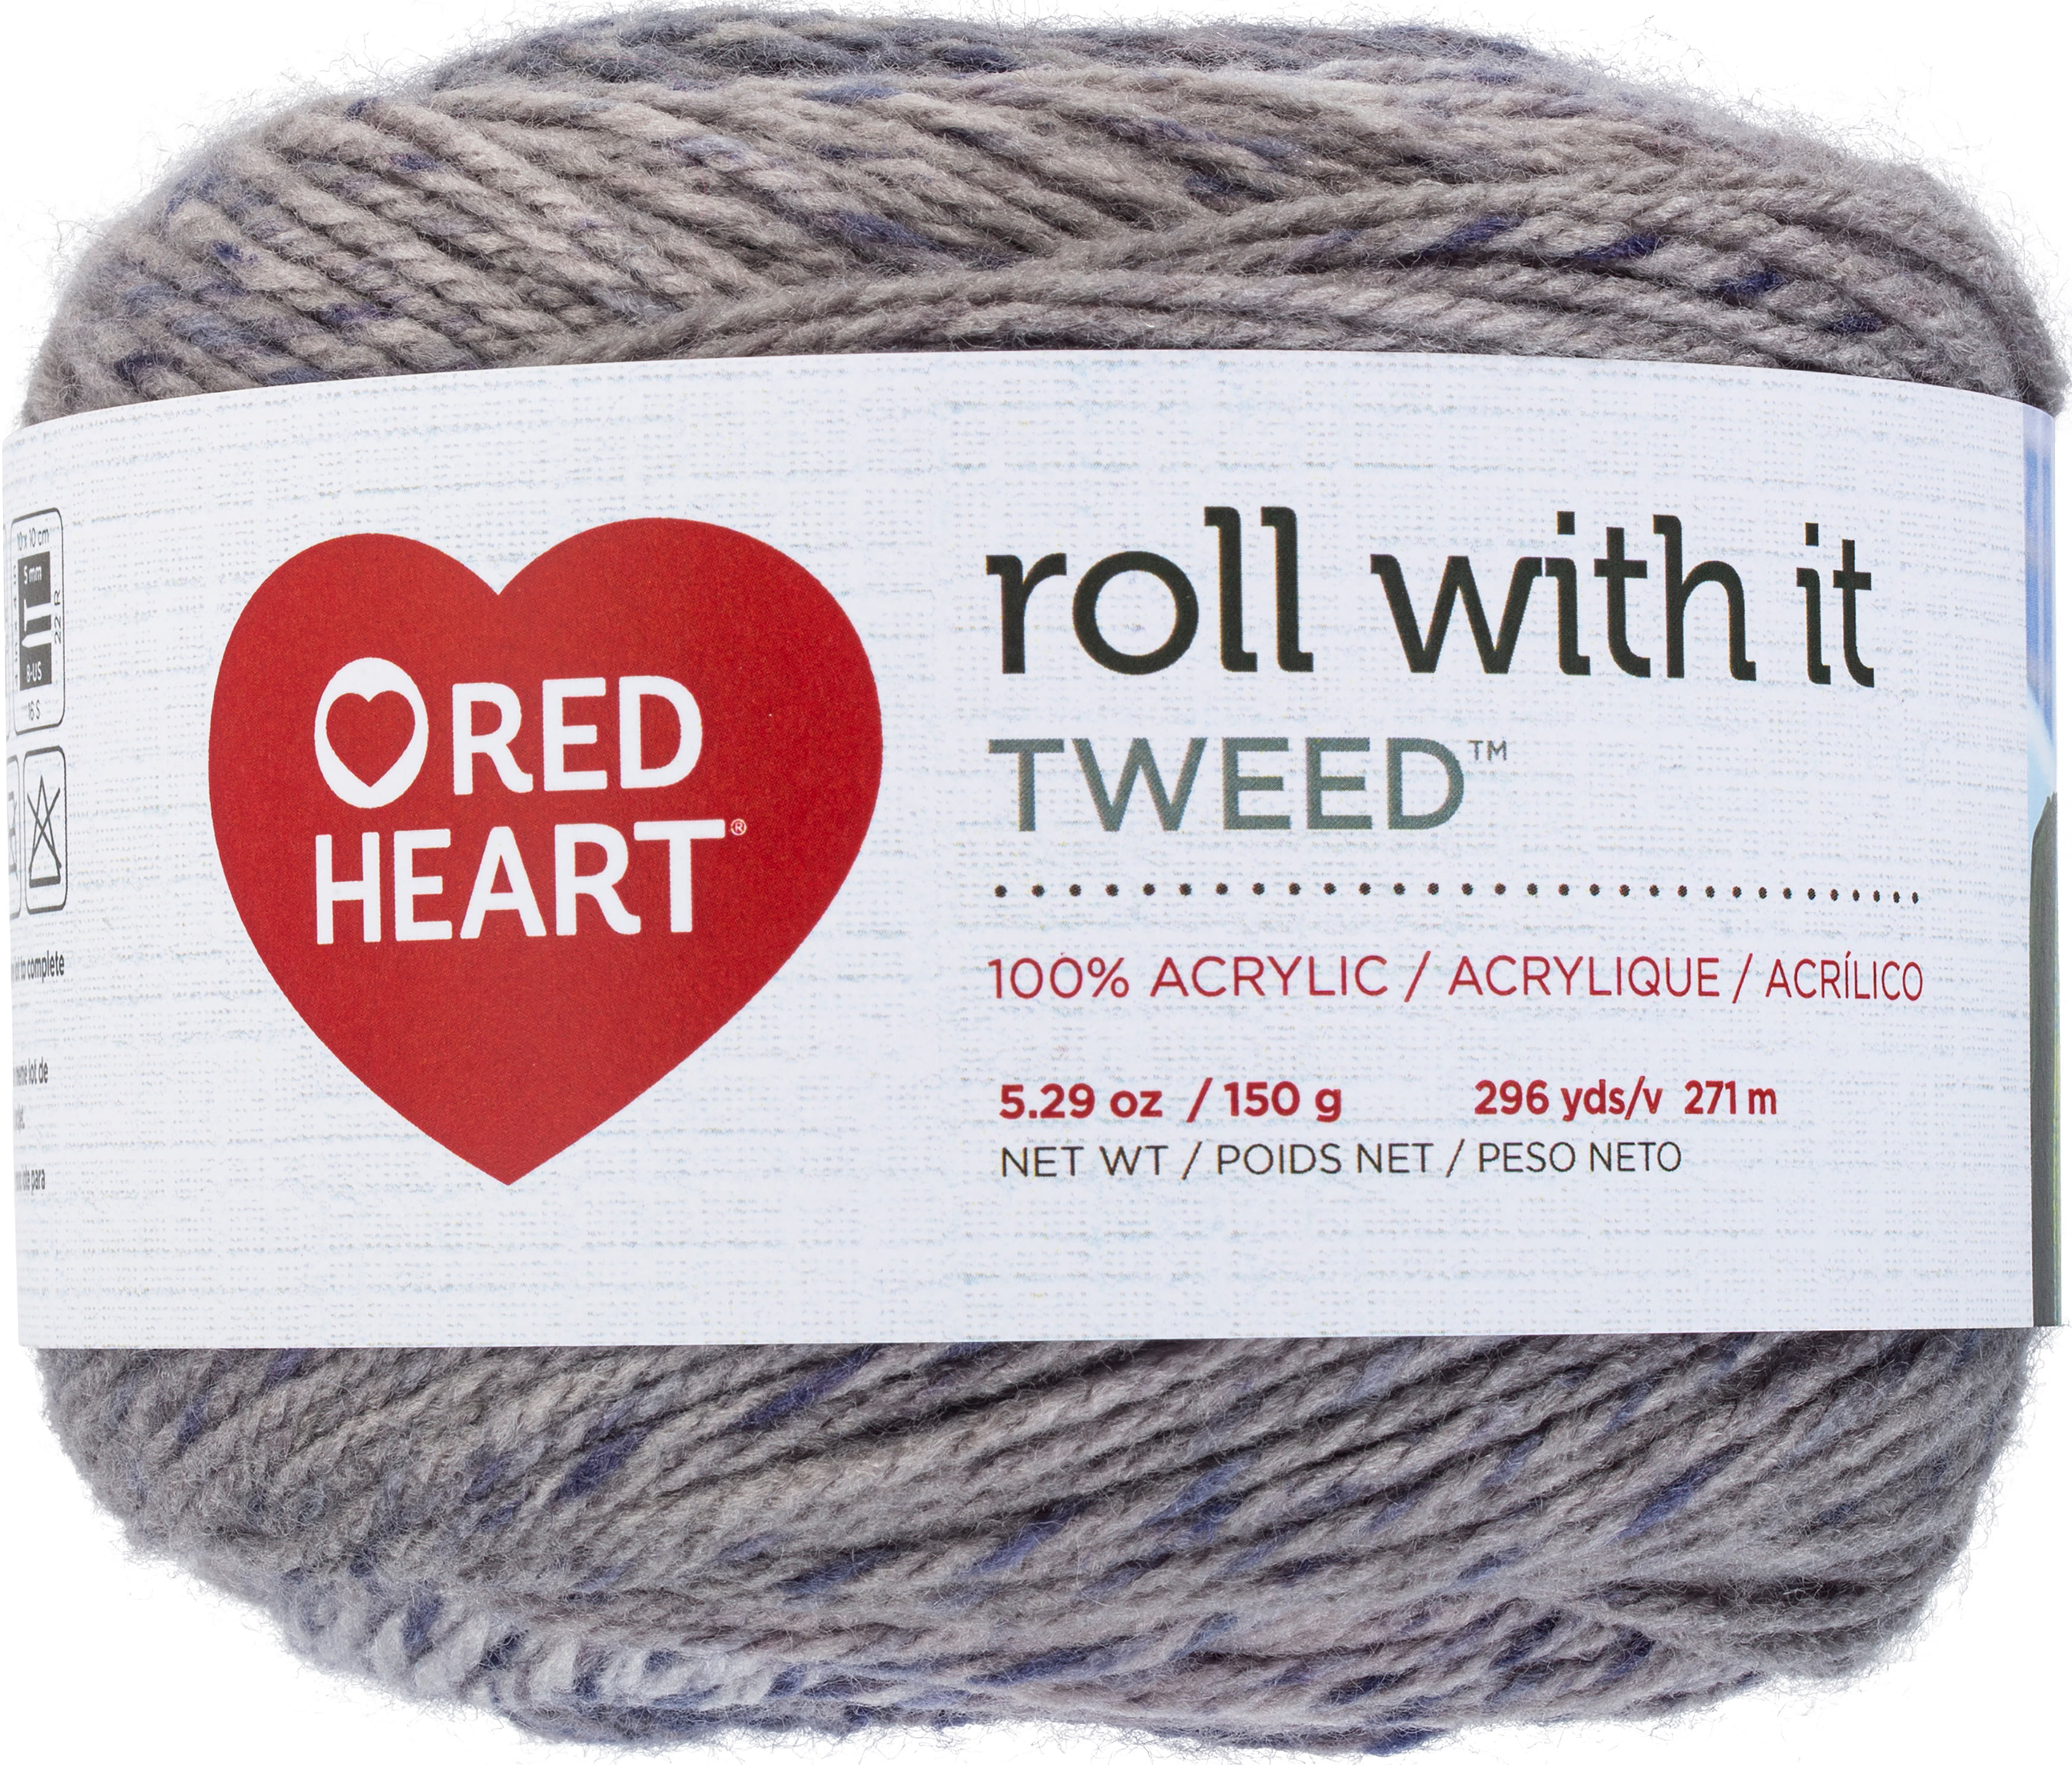 red heart roll with it tweed yarn